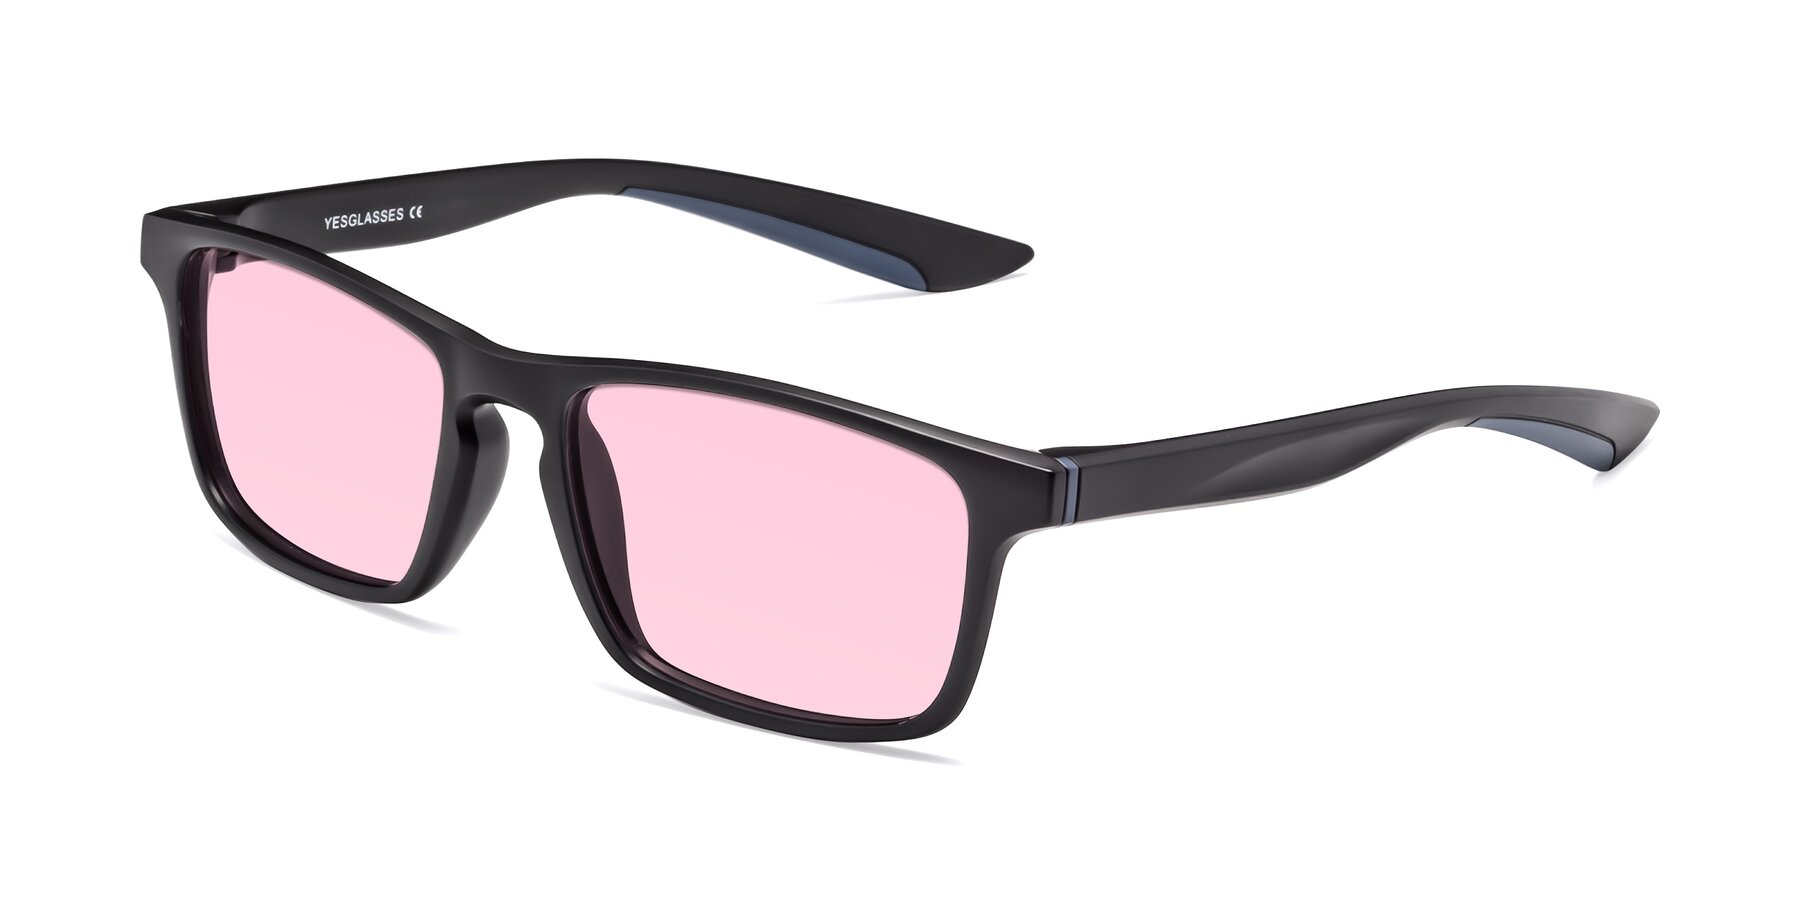 Angle of Passion in Matte Black-Blue with Light Pink Tinted Lenses